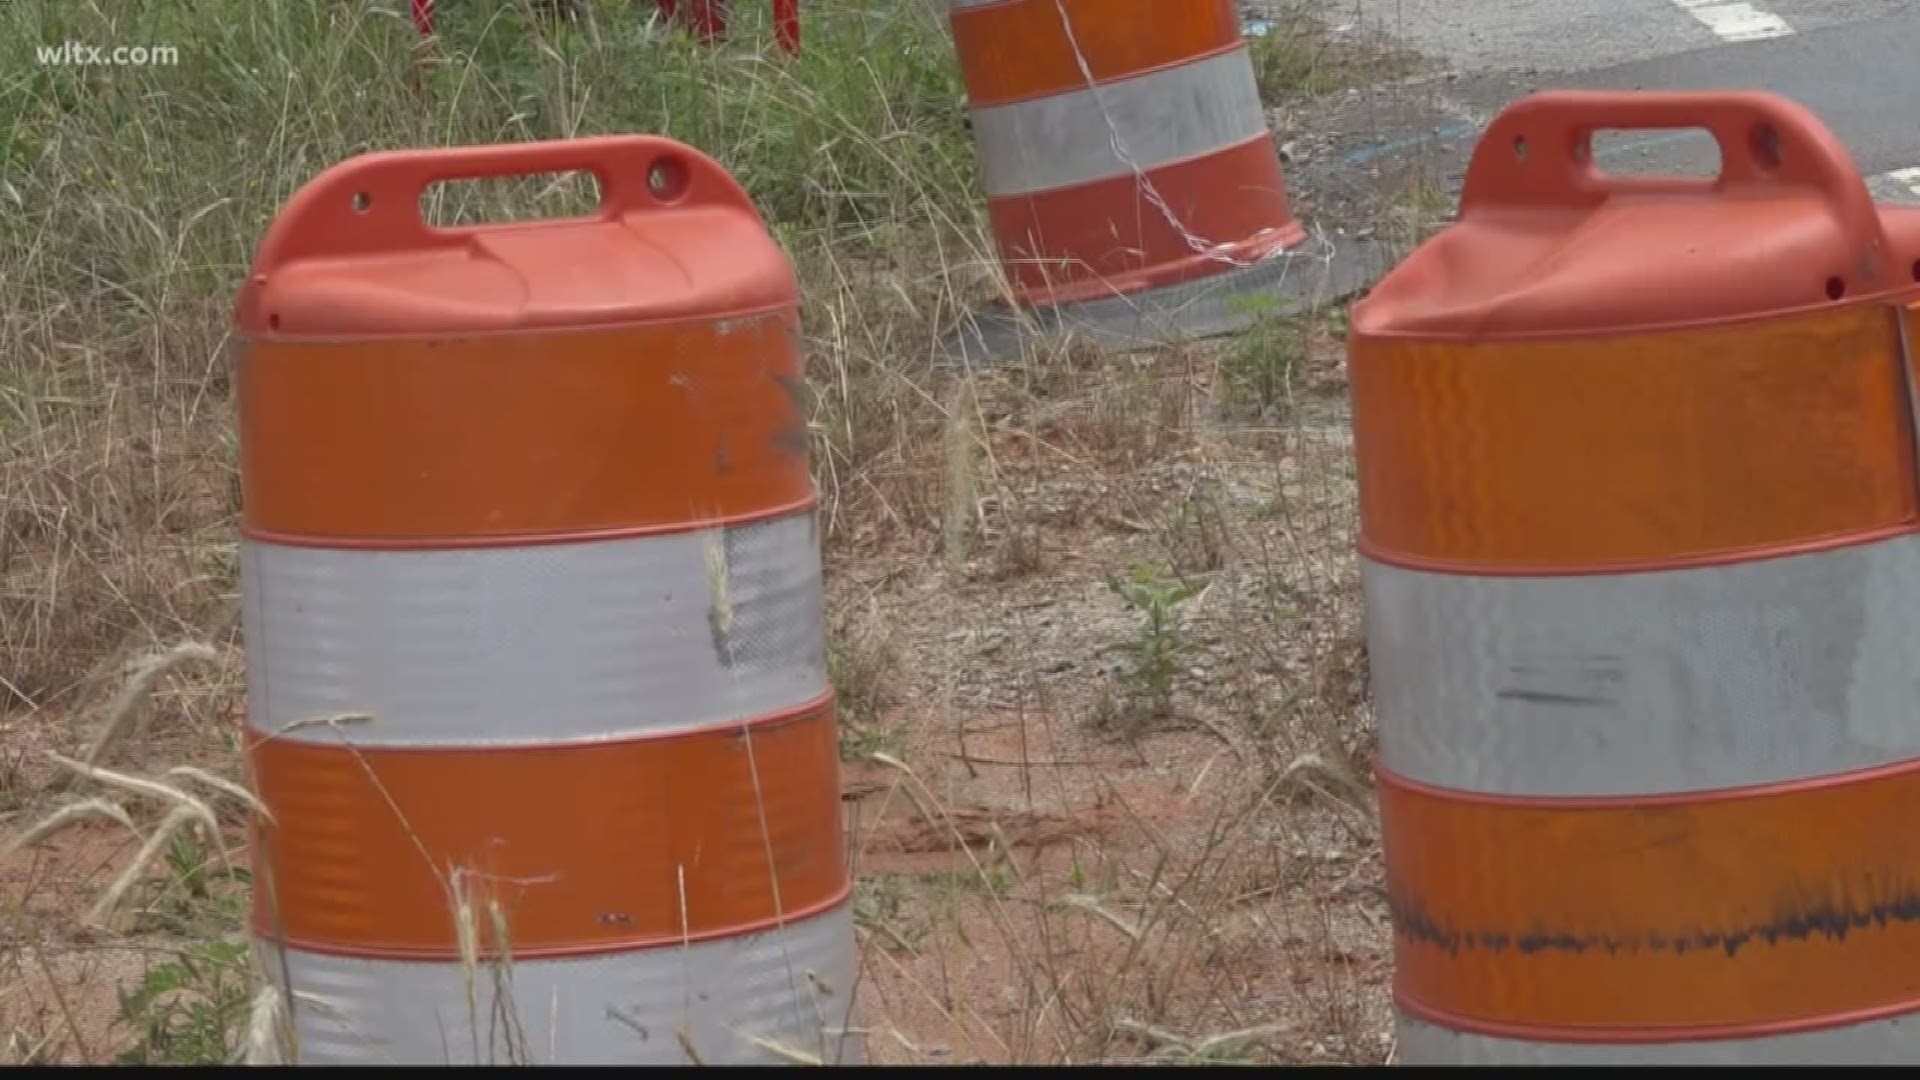 What's going on with the construction on Dutch Fork and Johnson Marina road?